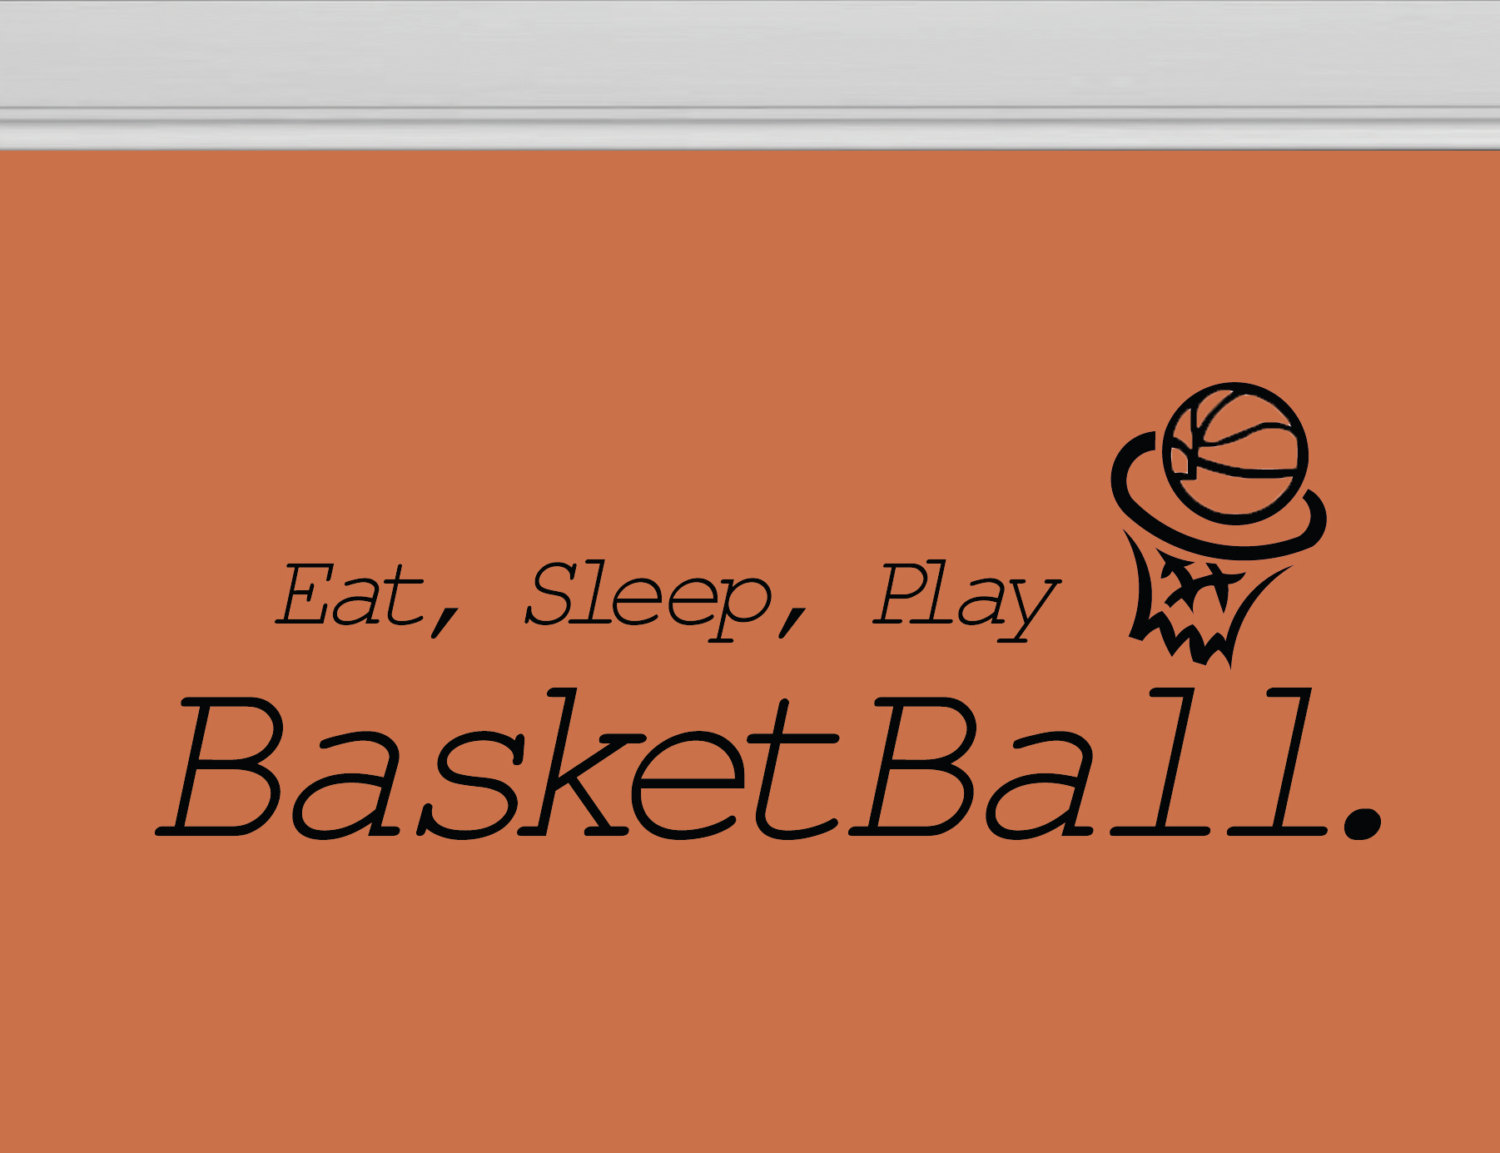 Pink basketball Images  Search Images on Everypixel